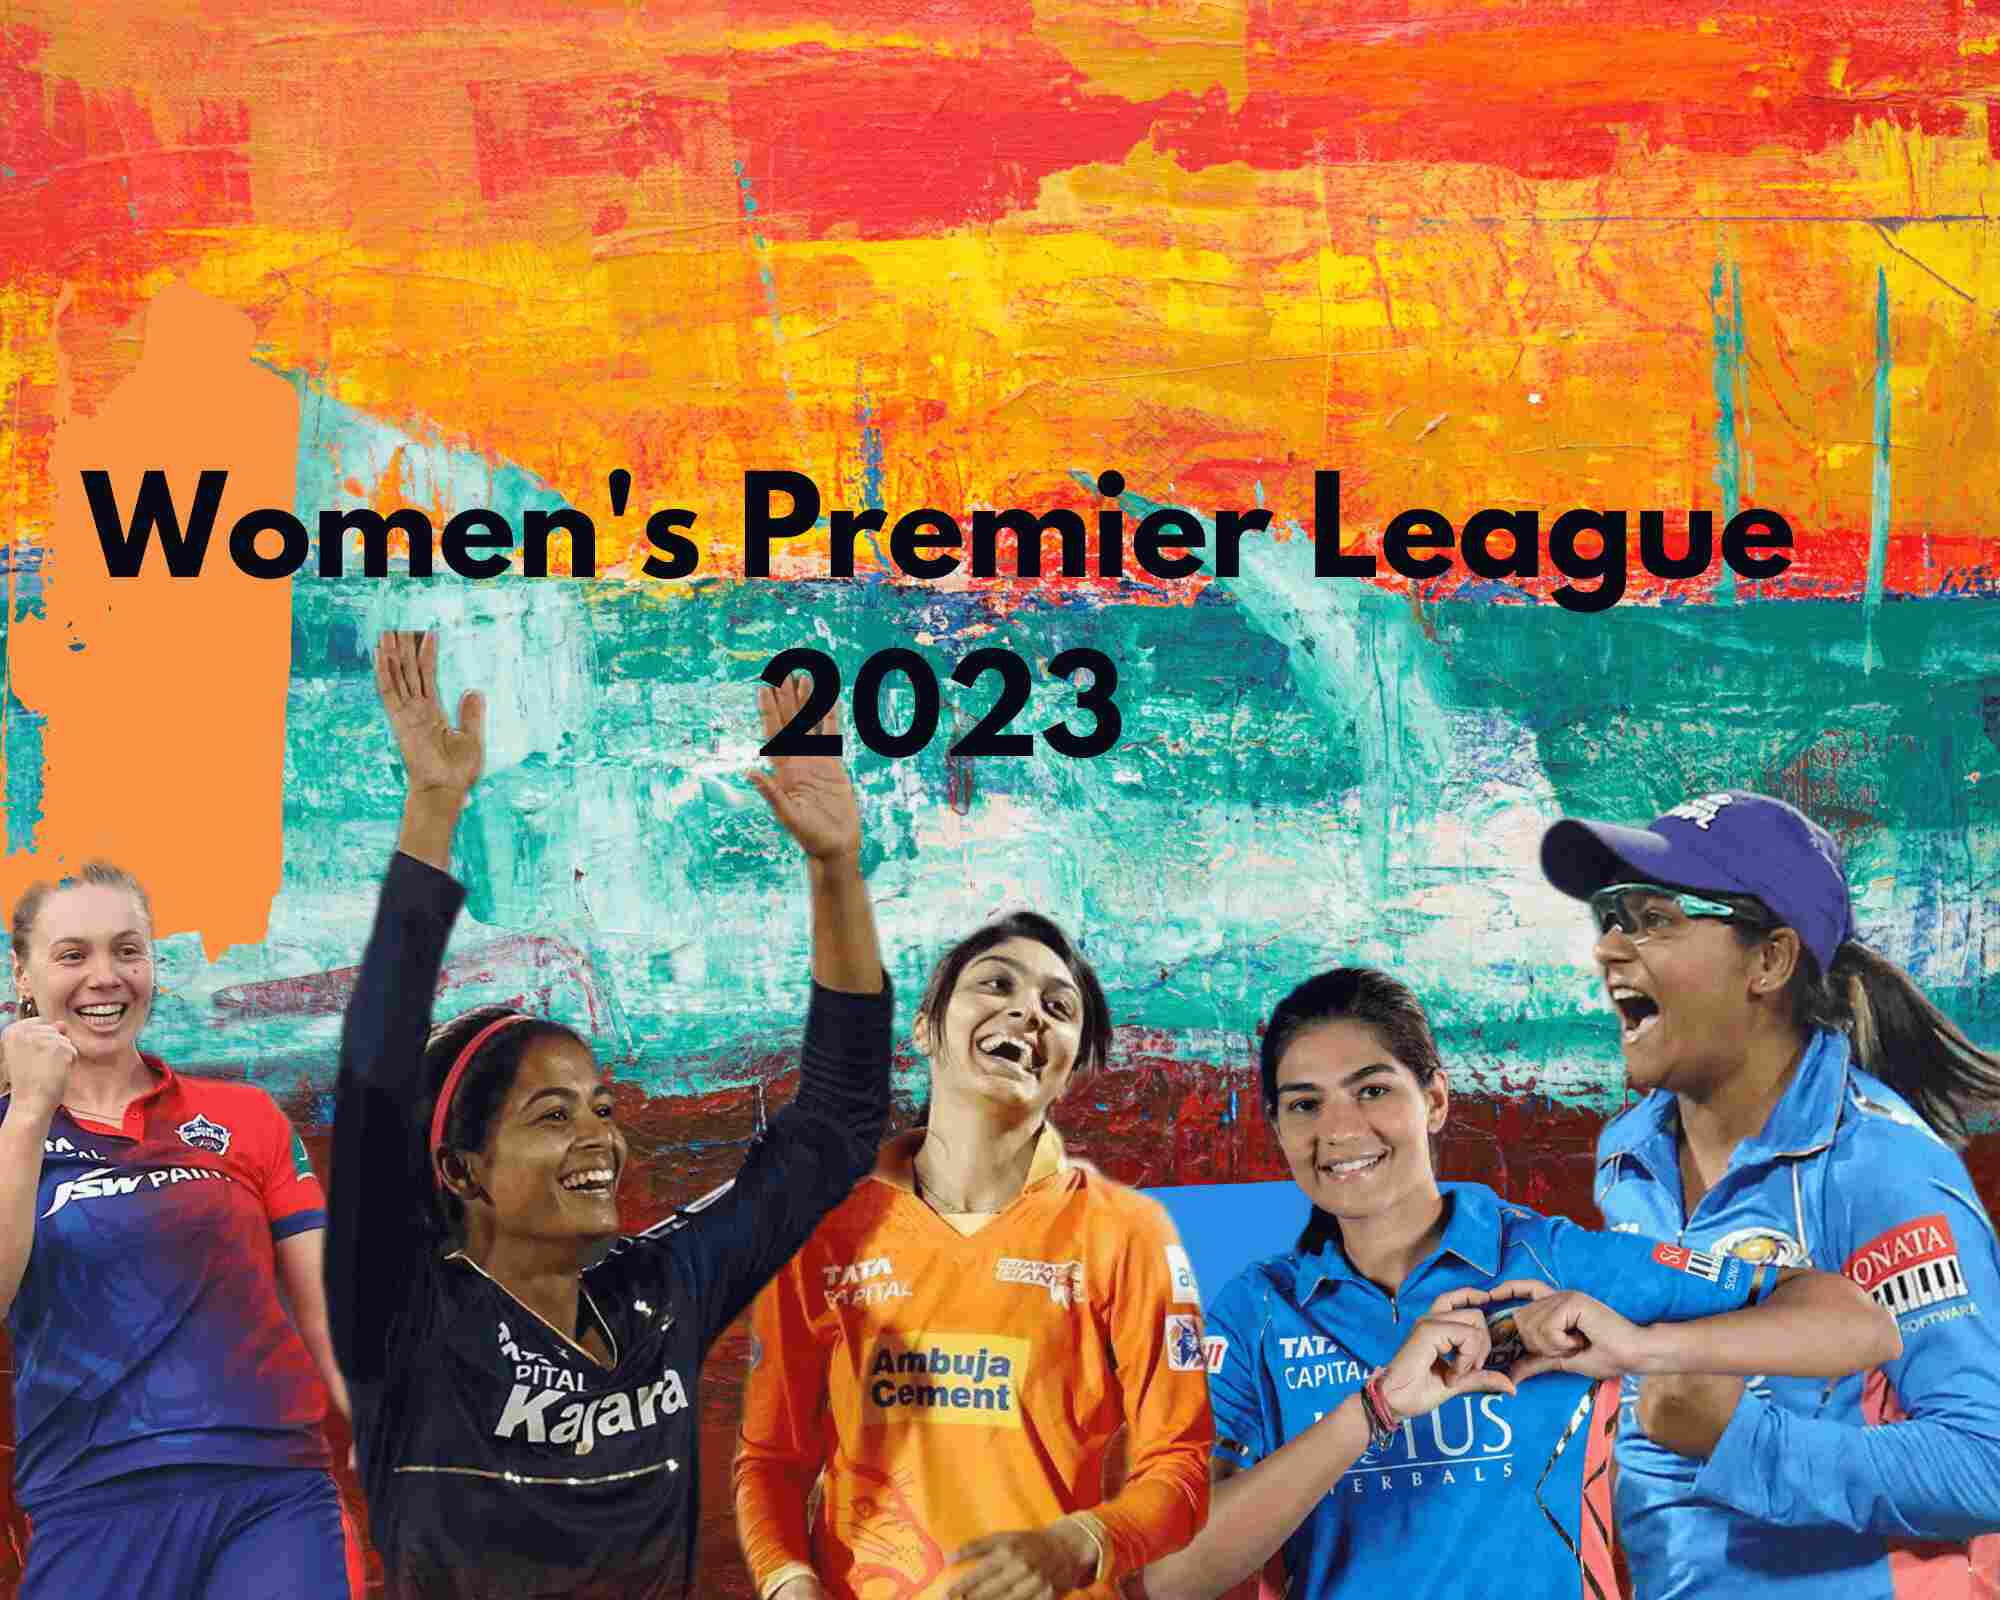 From Deol, Ishaque to Norris: Here are the Top 5 Emerging Players From WPL 2023